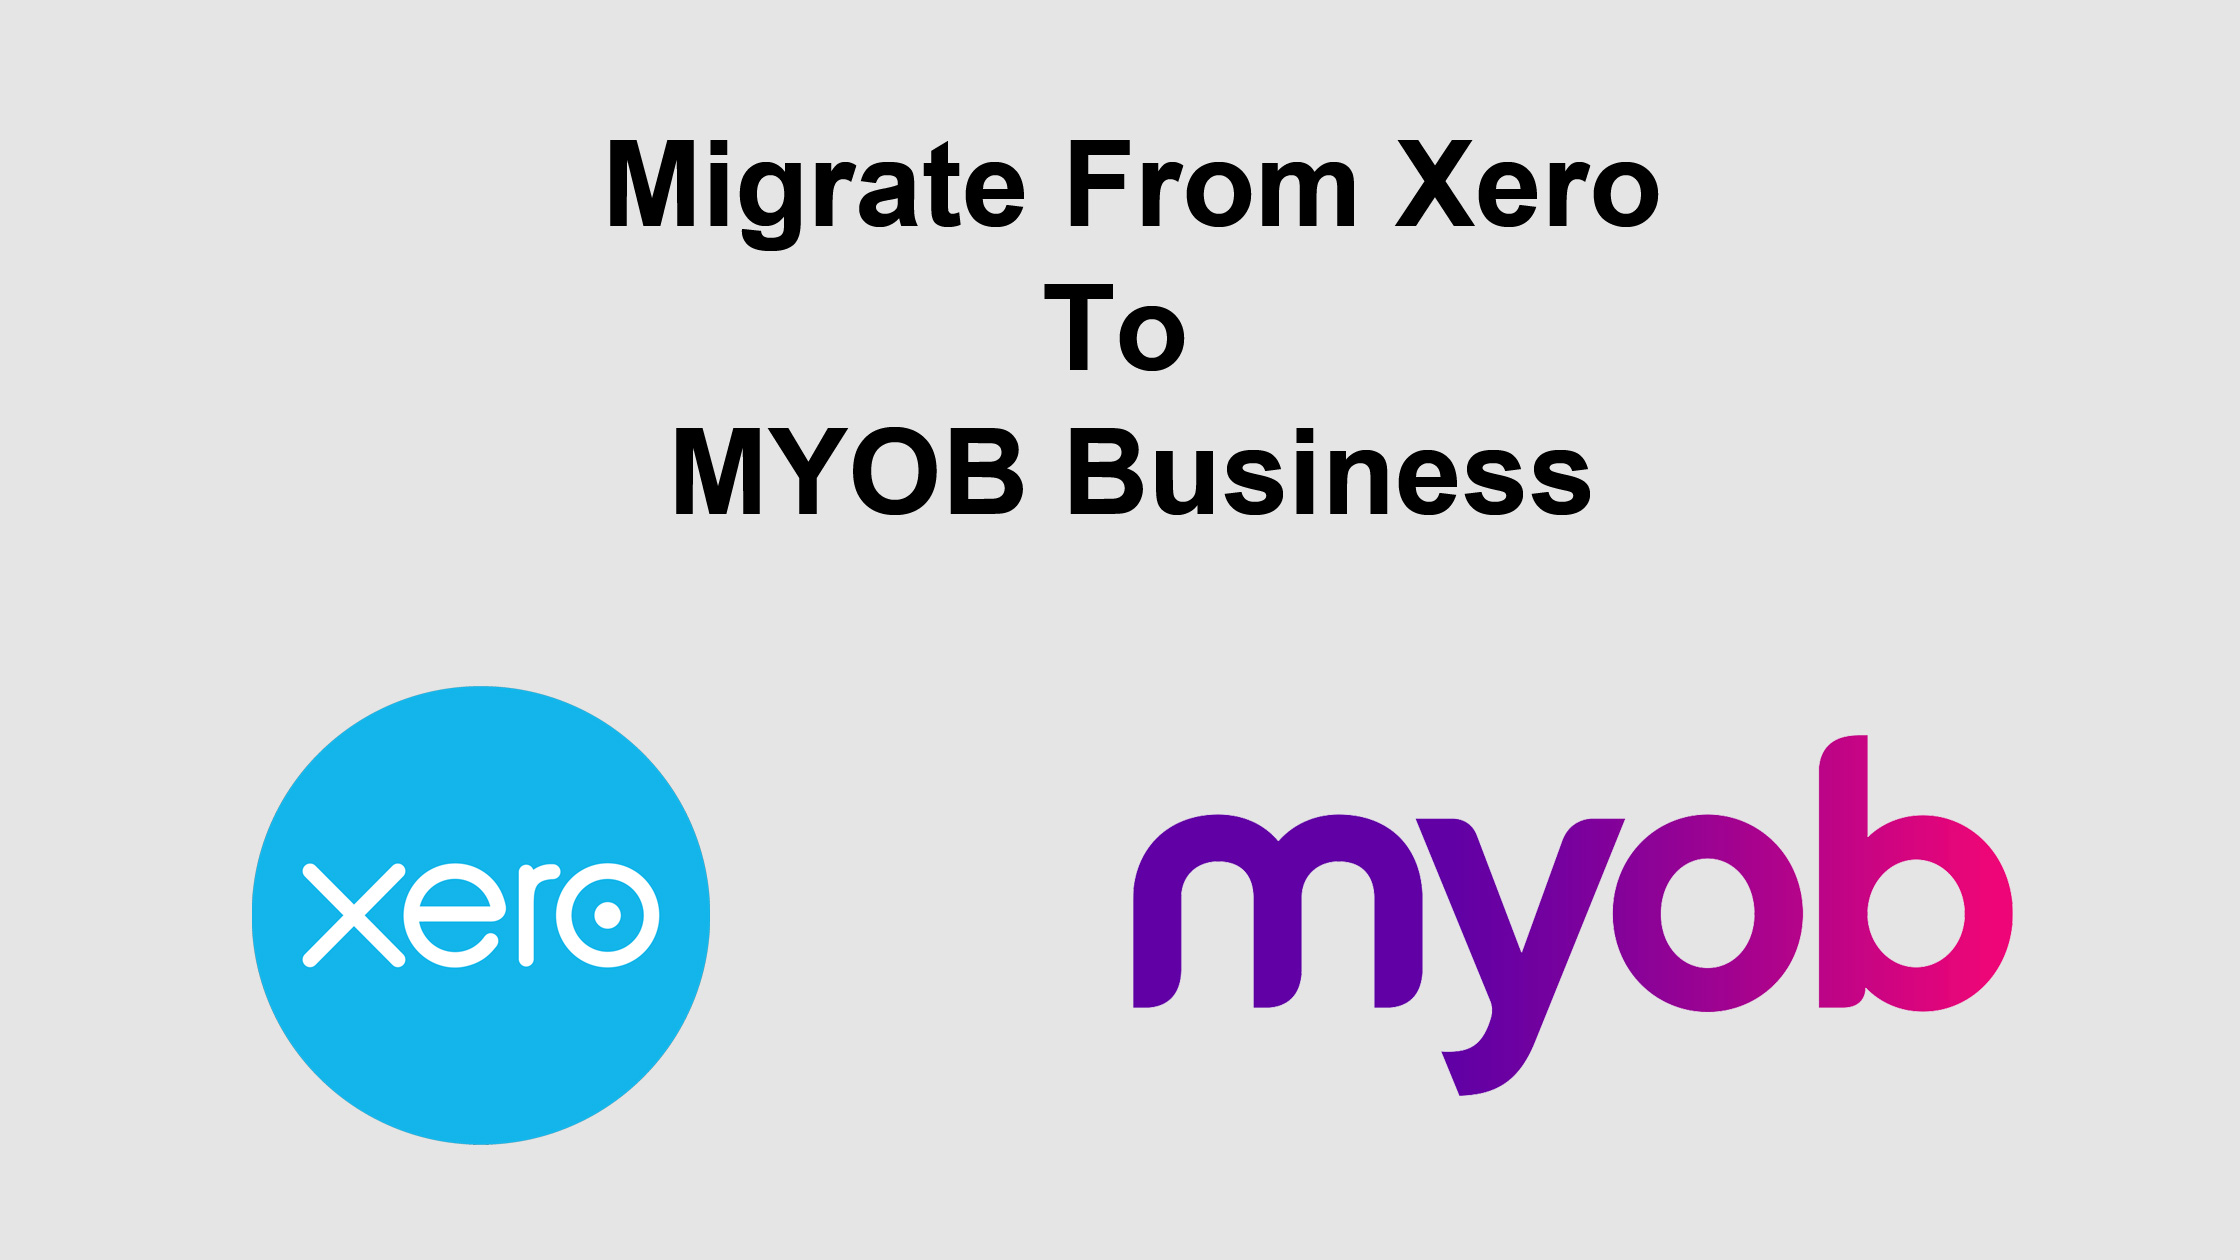 Migrate from Xero to MYOB Business